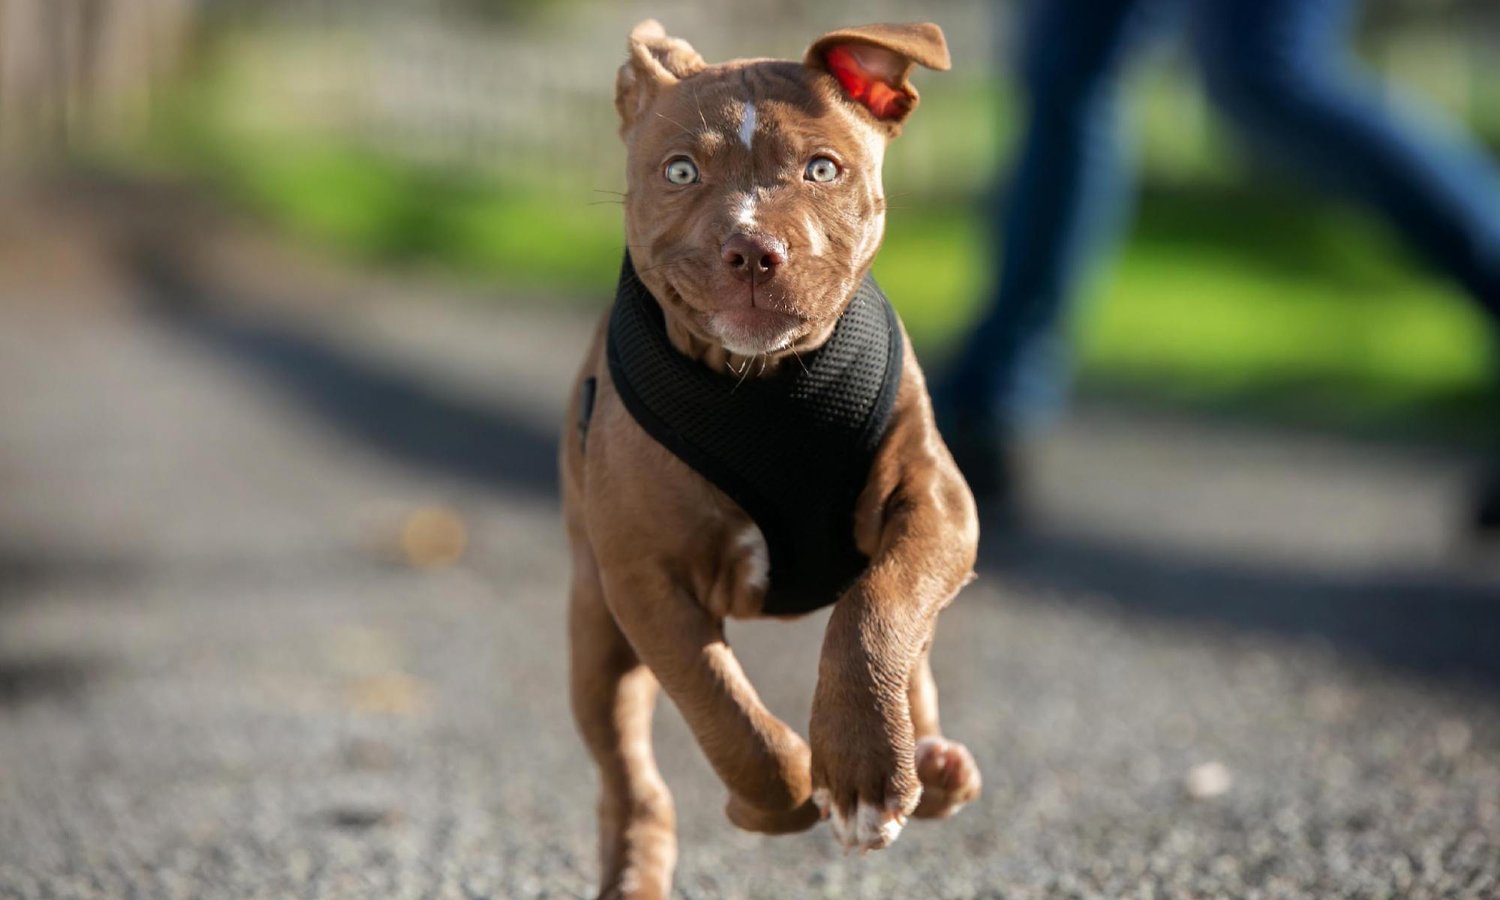 Little brown puppy prancing in his black harness with its ears flapping in the wind